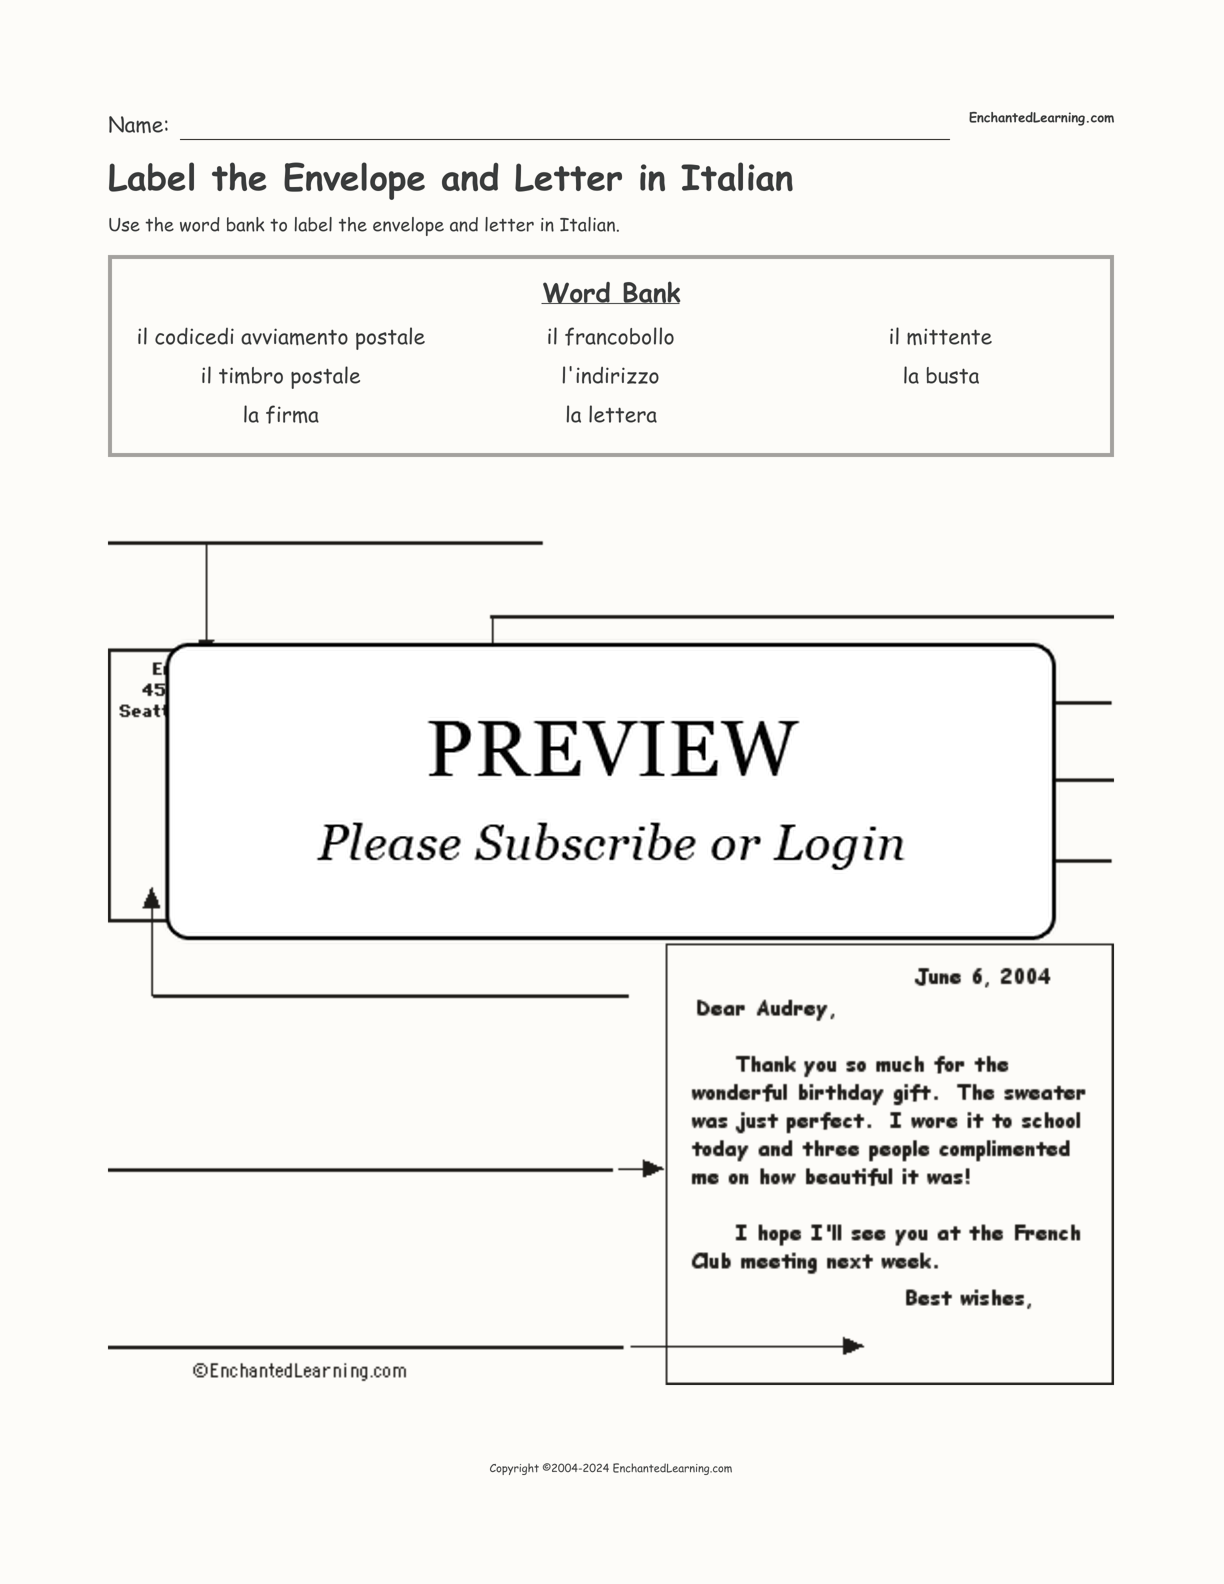 Label the Envelope and Letter in Italian interactive worksheet page 1